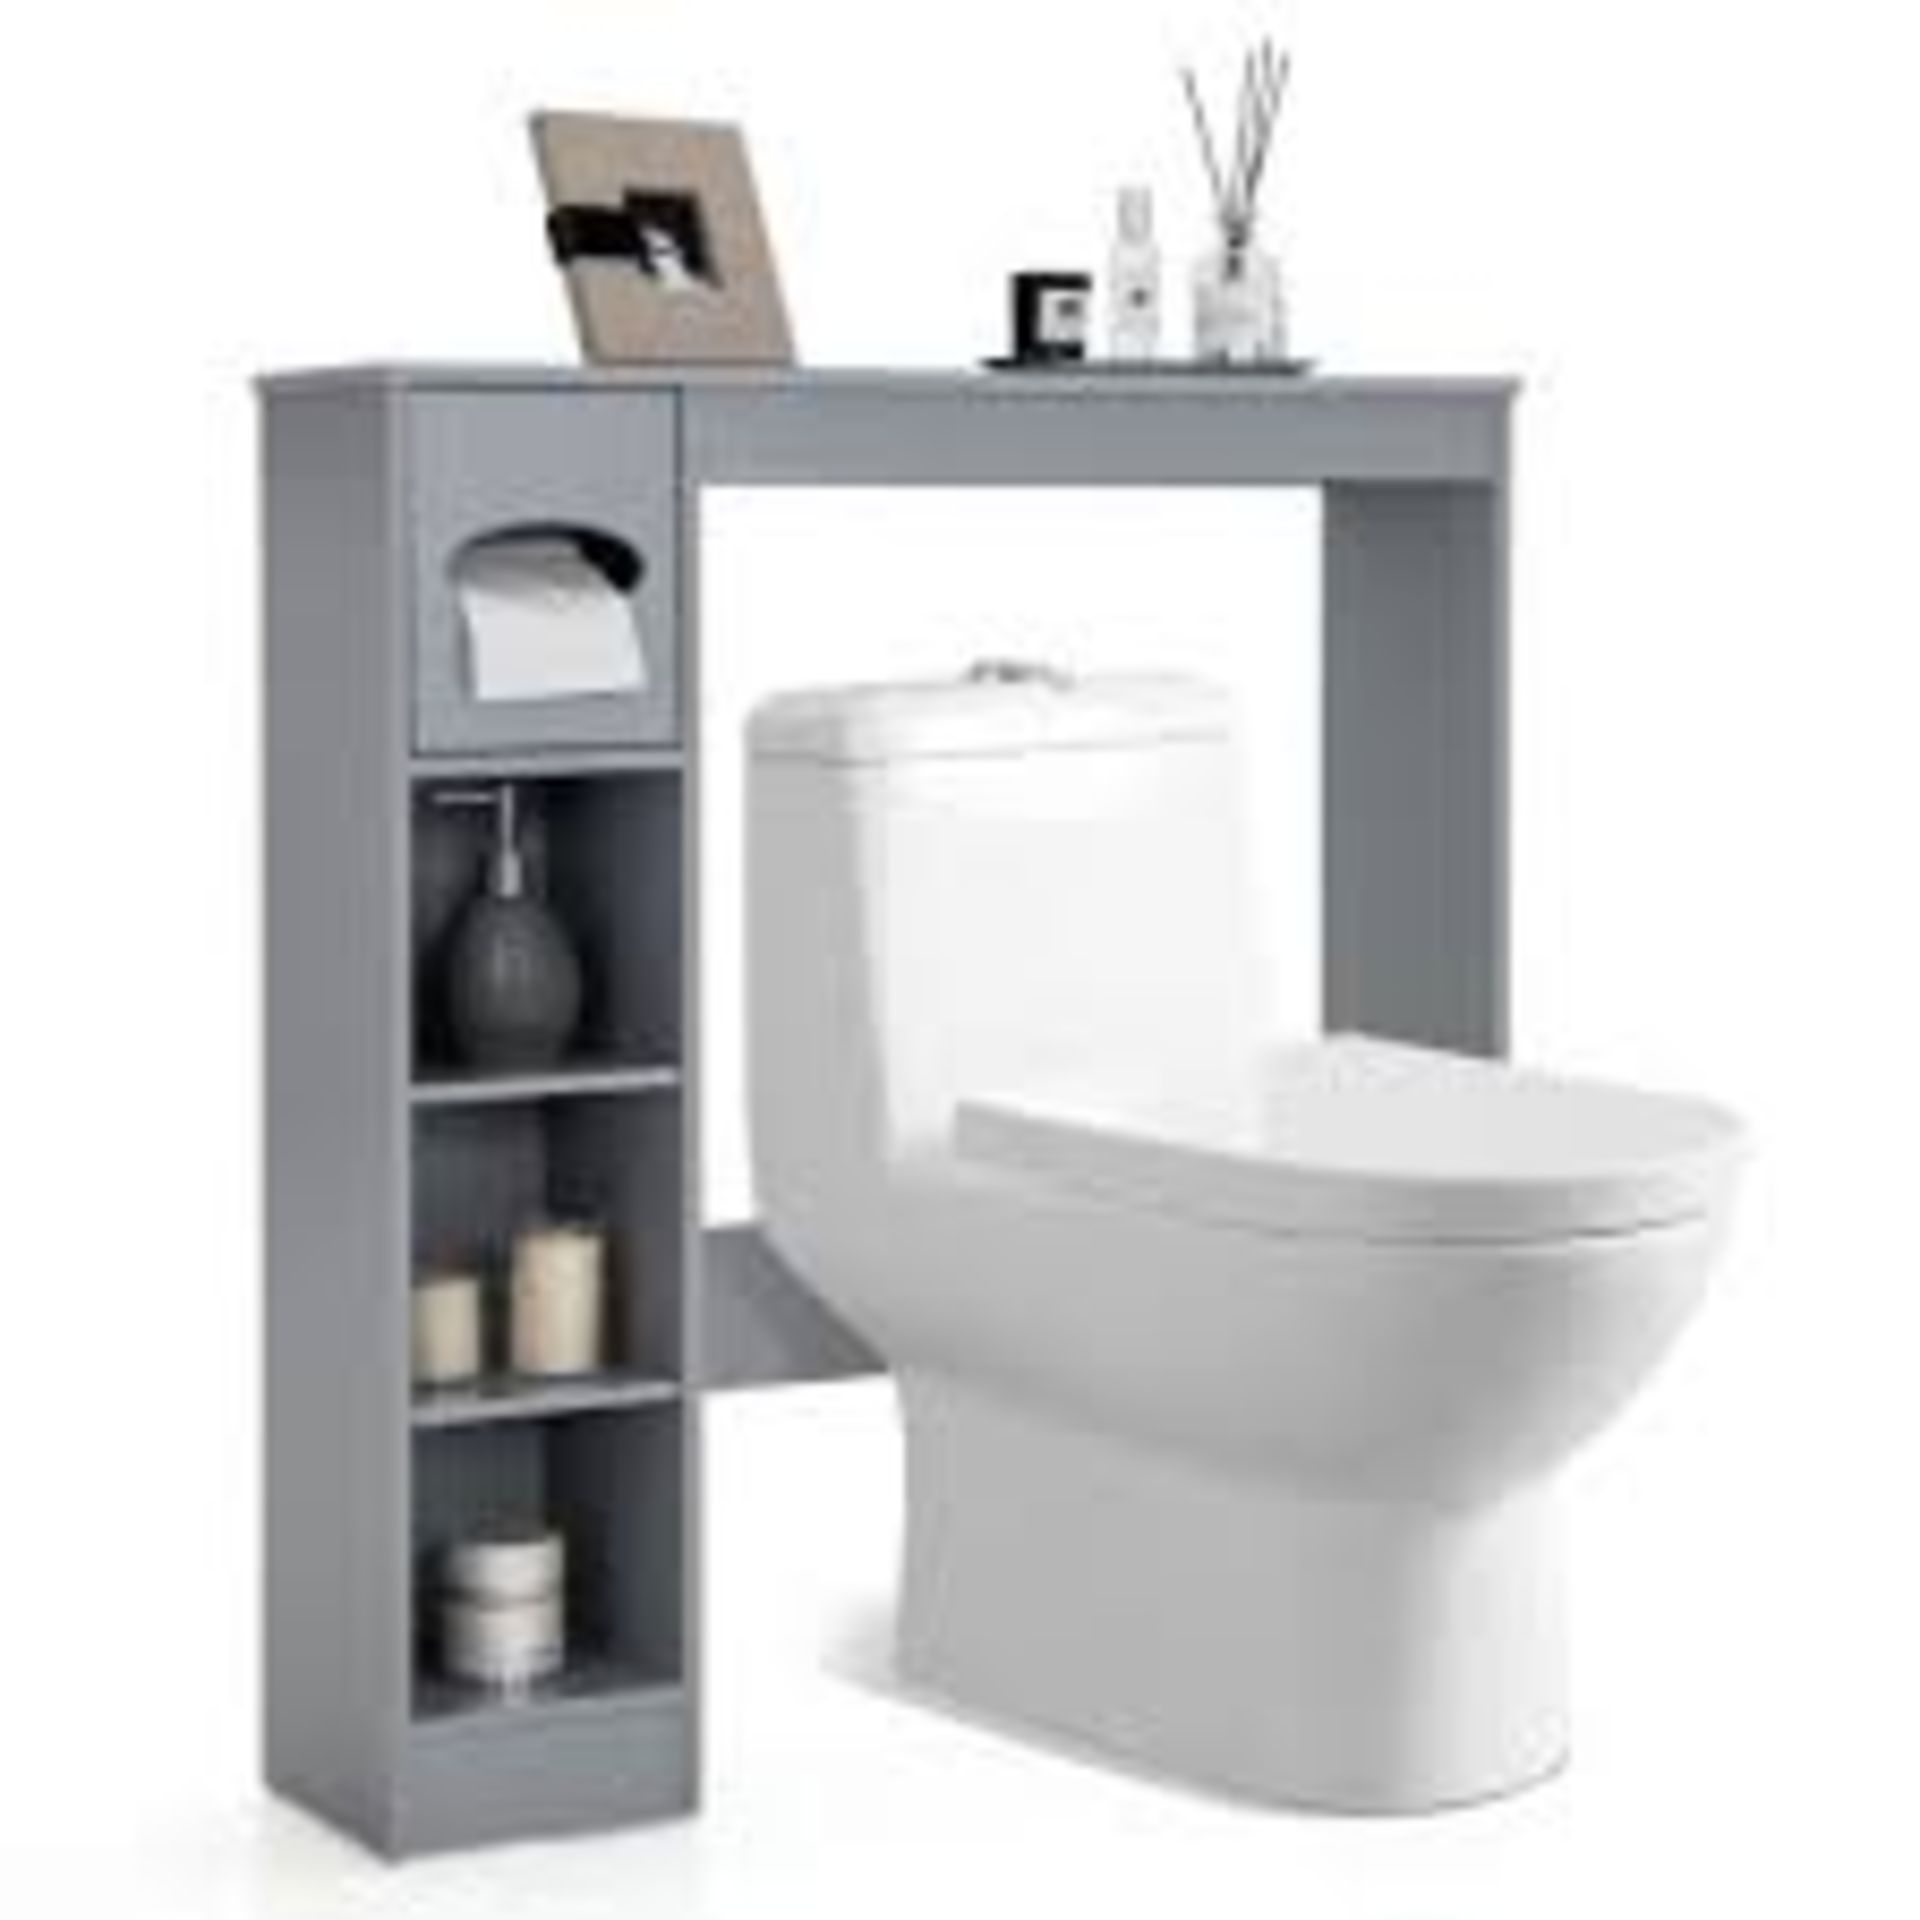 Freestanding Bathroom Space Saver with Toilet Paper Holder. - R13a.10.. Featuring a unique over-